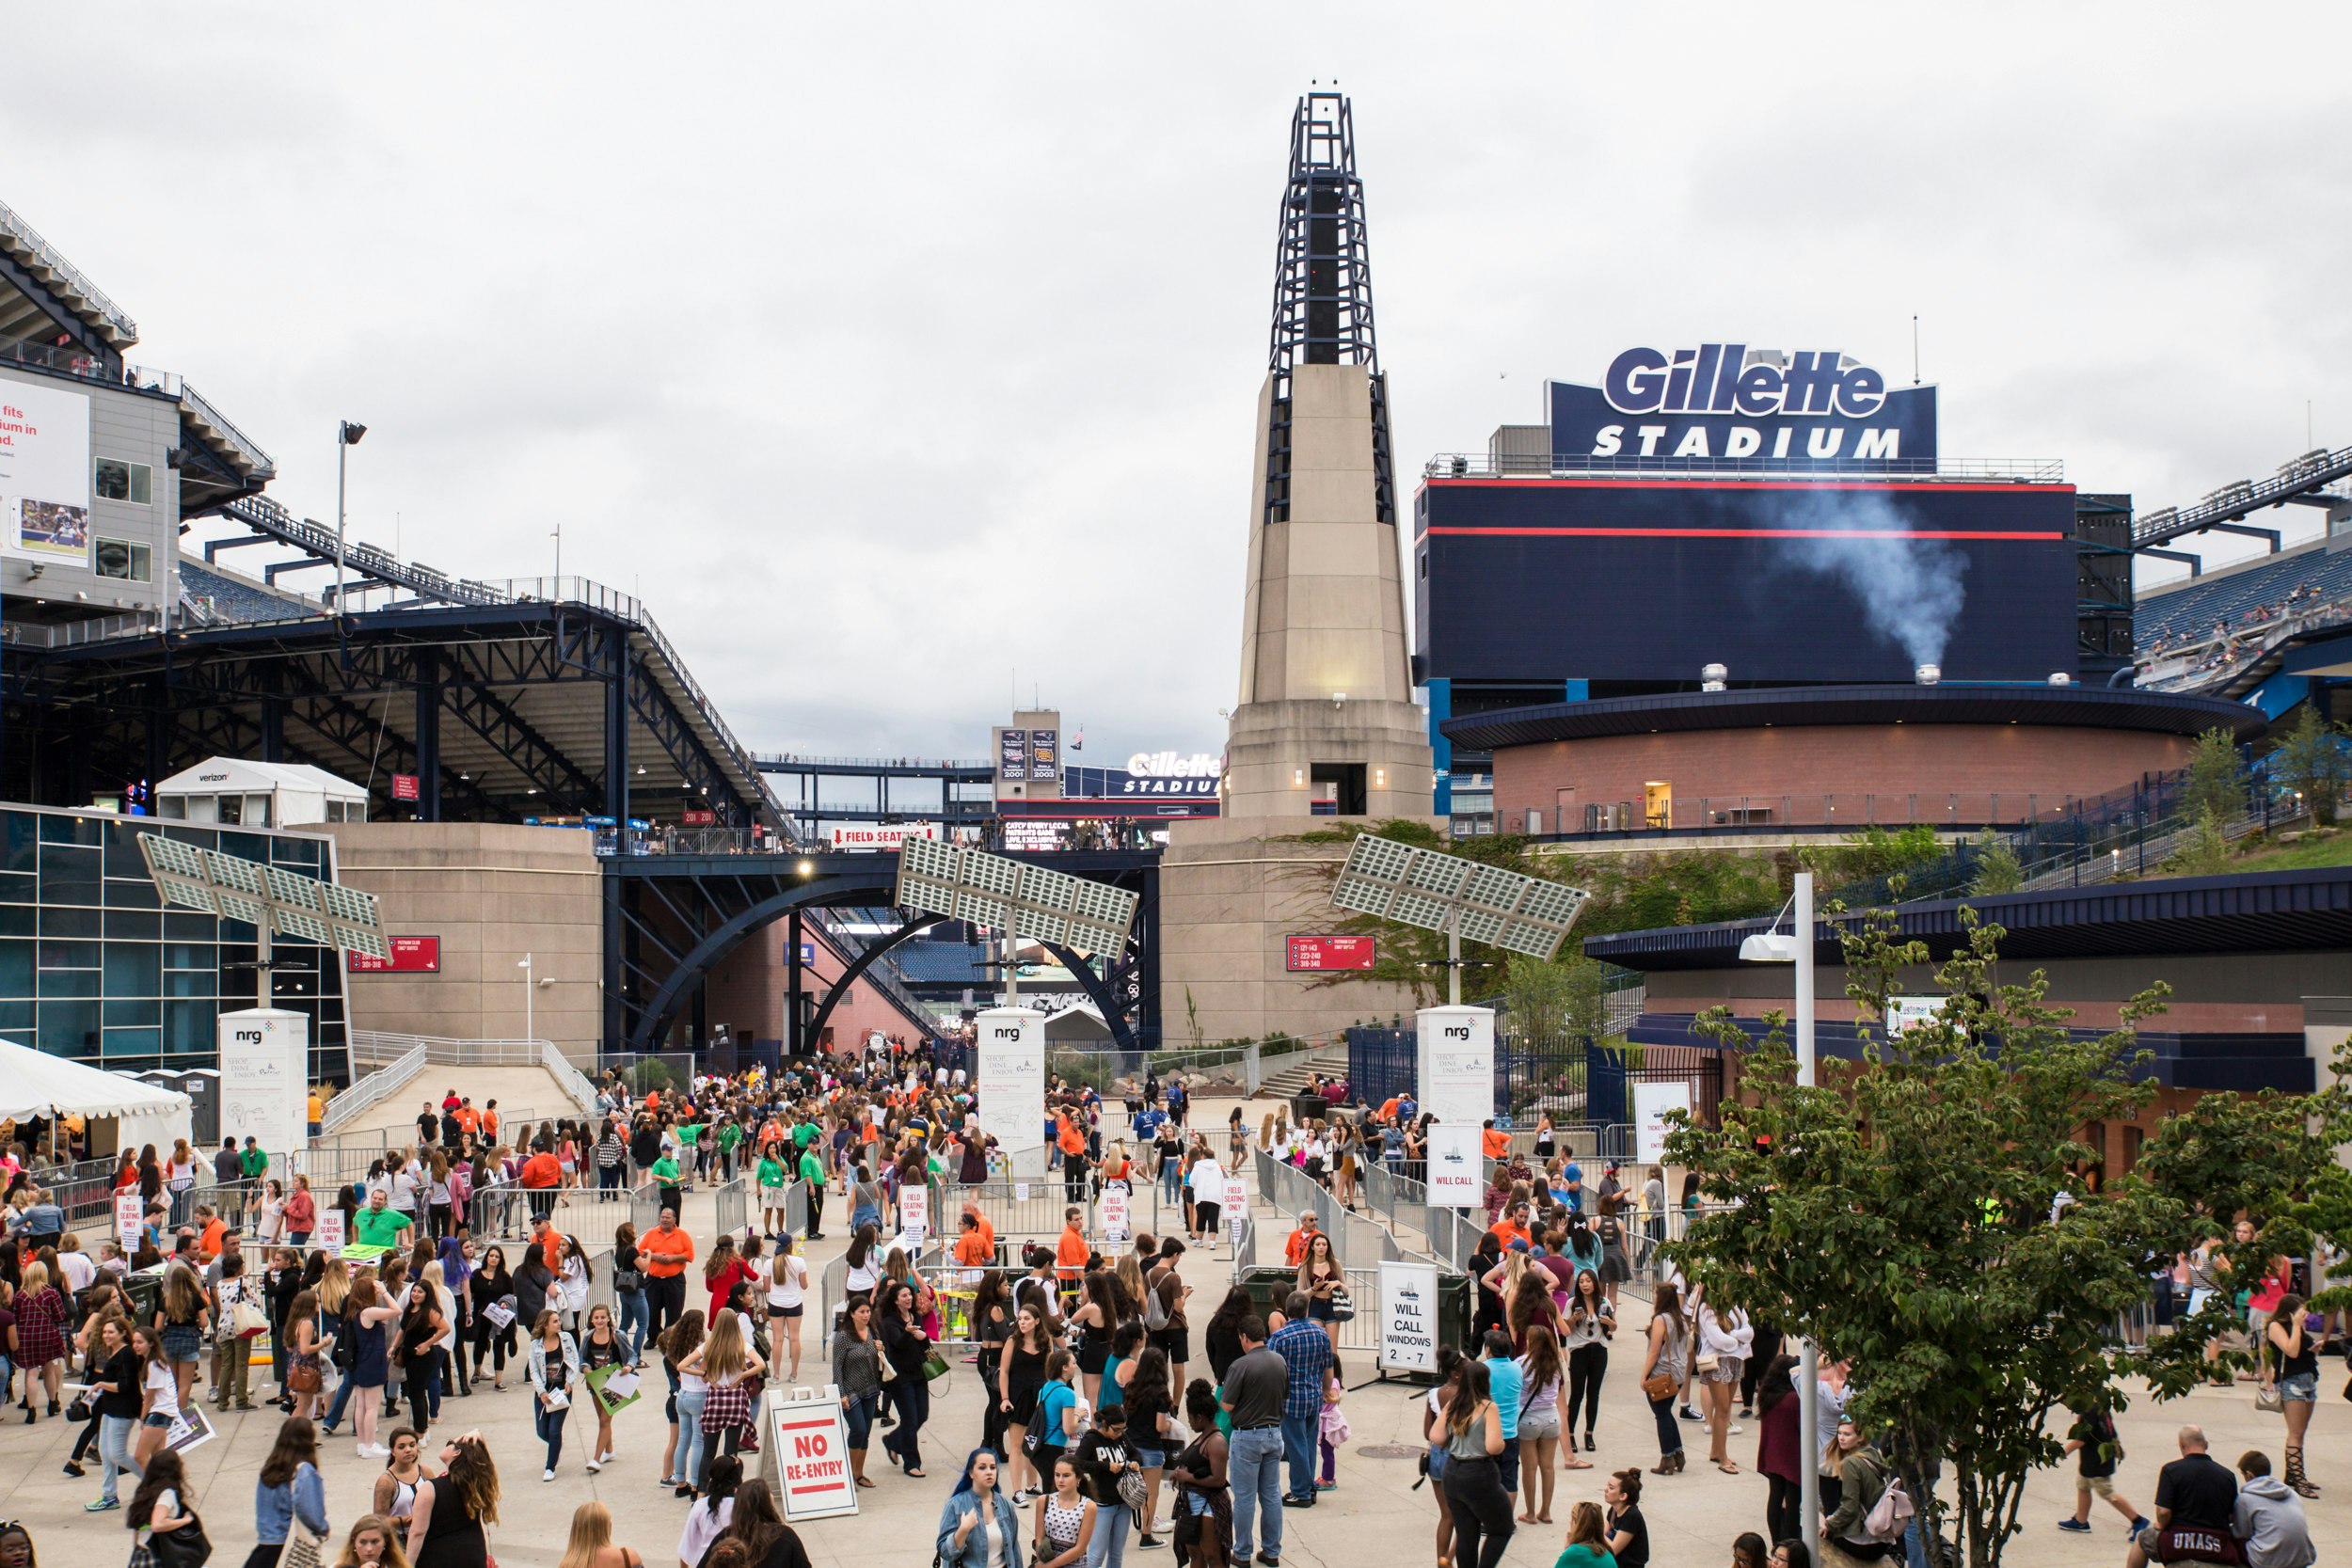 A group of people walk and stand around a concourse at Gillette Stadium in Foxborough; nfl cities travel